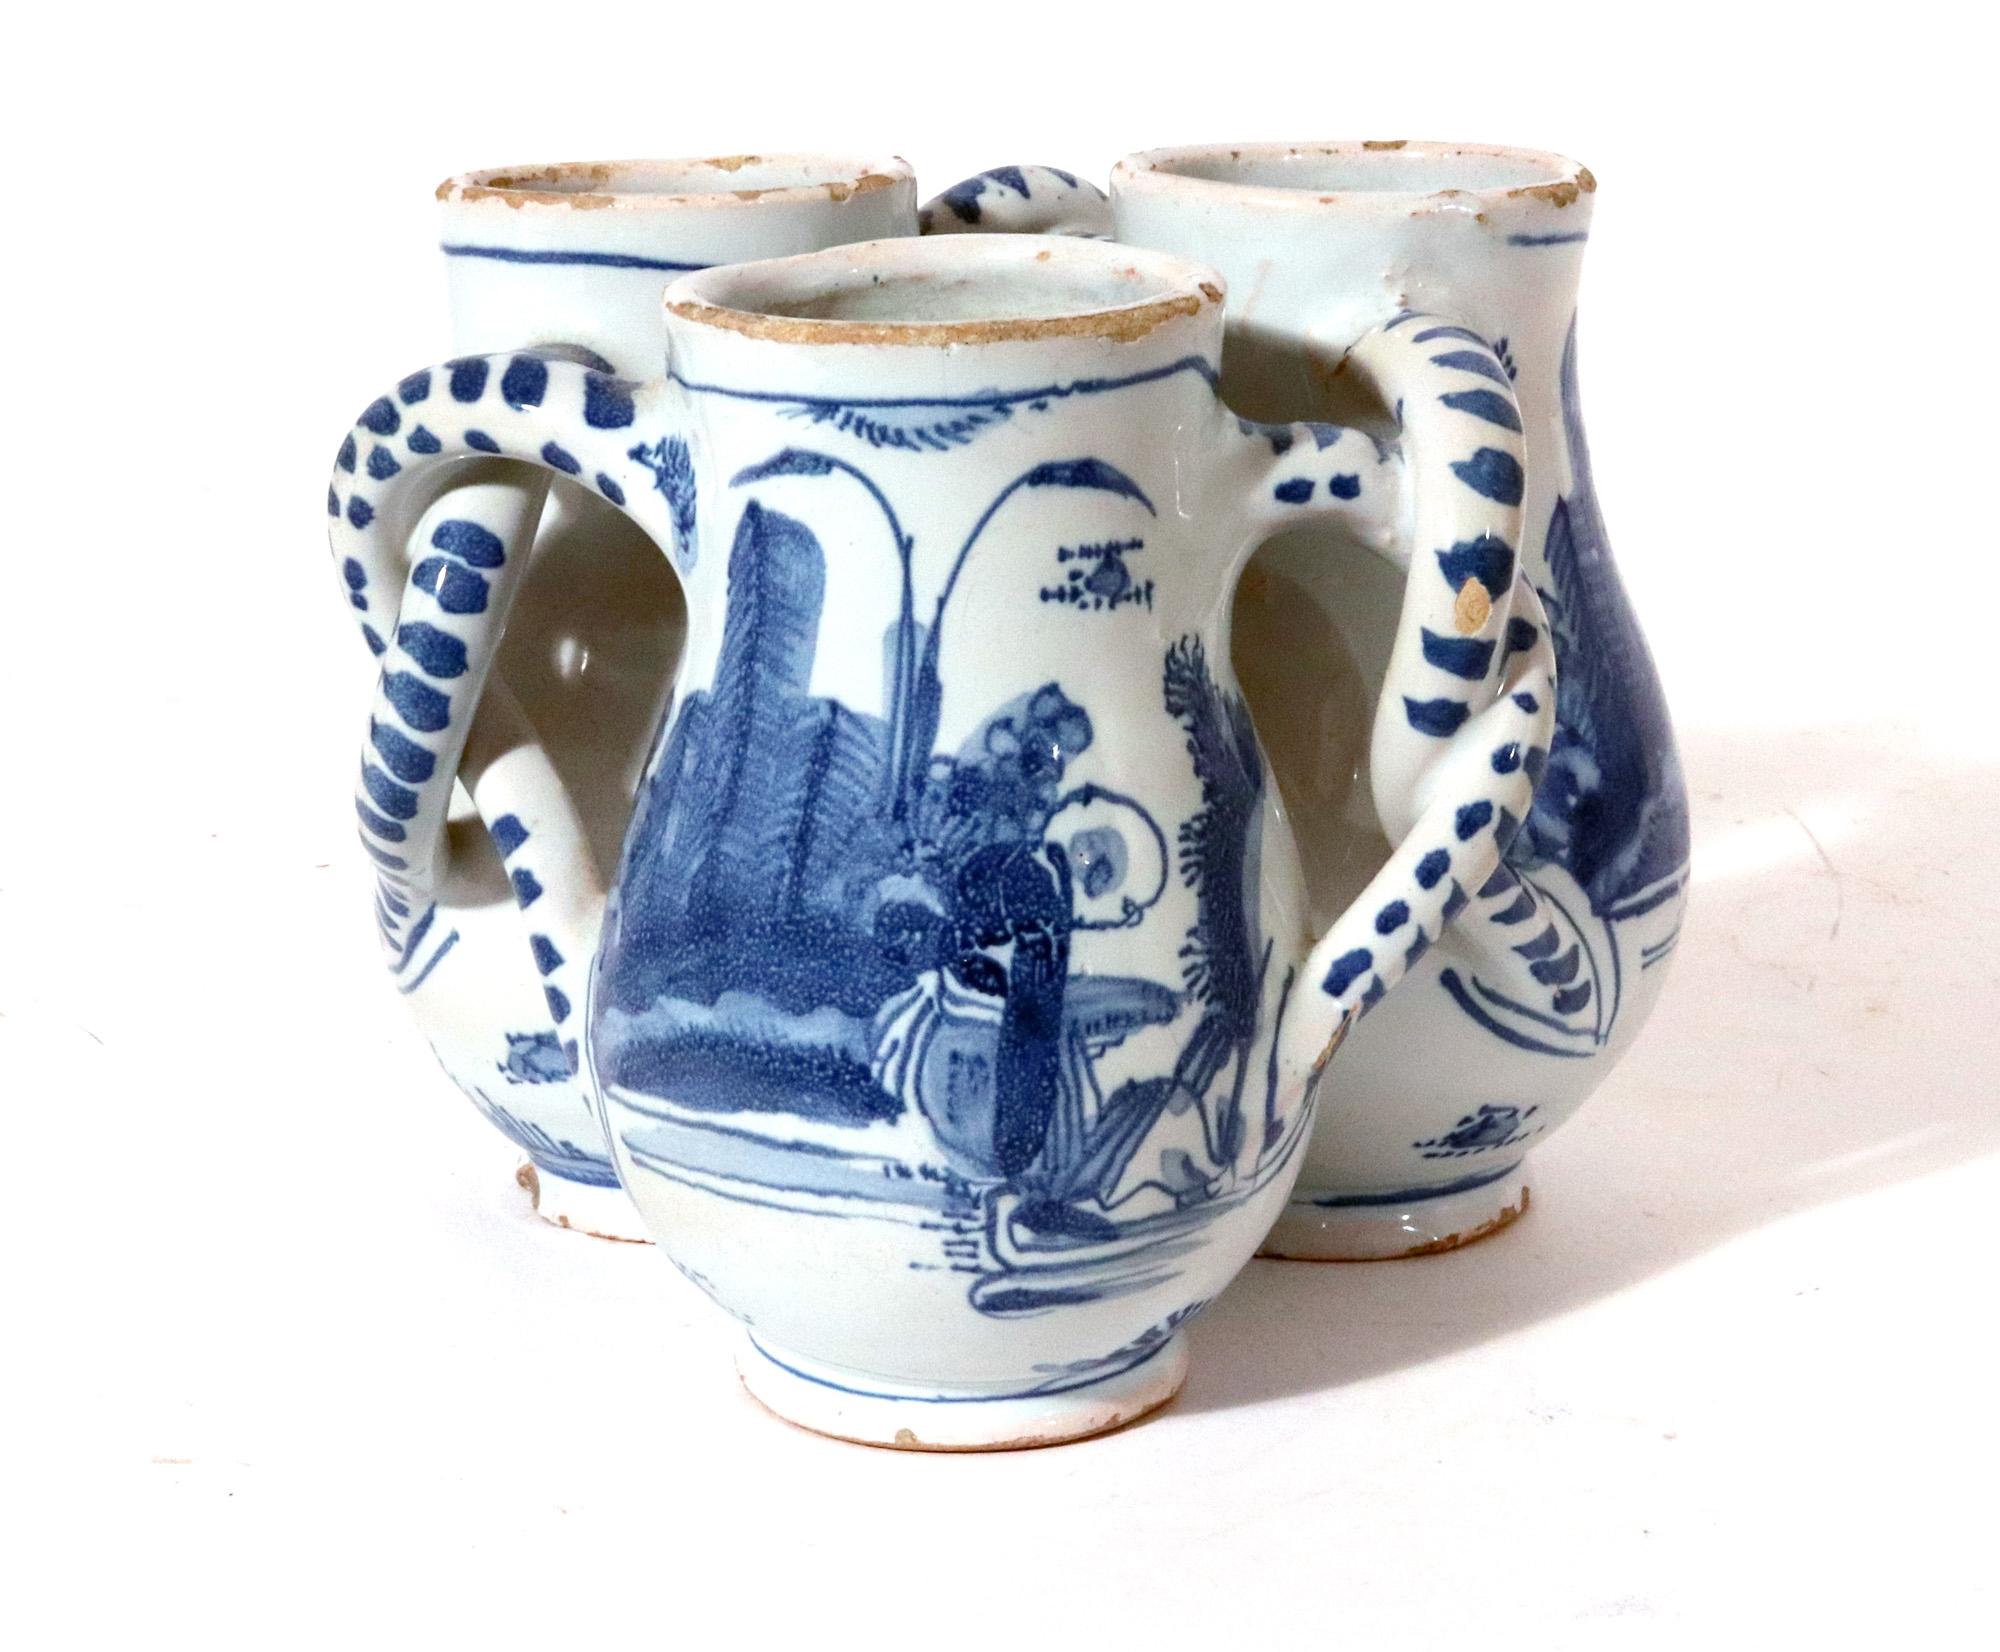 17th century English Delftware Fuddling cup,
Probably Southwark or London
Circa 1660-80

The early English delftware fuddling cup has underglaze blue & white Chinoiserie decoration with a single male figure to one side and towering layered